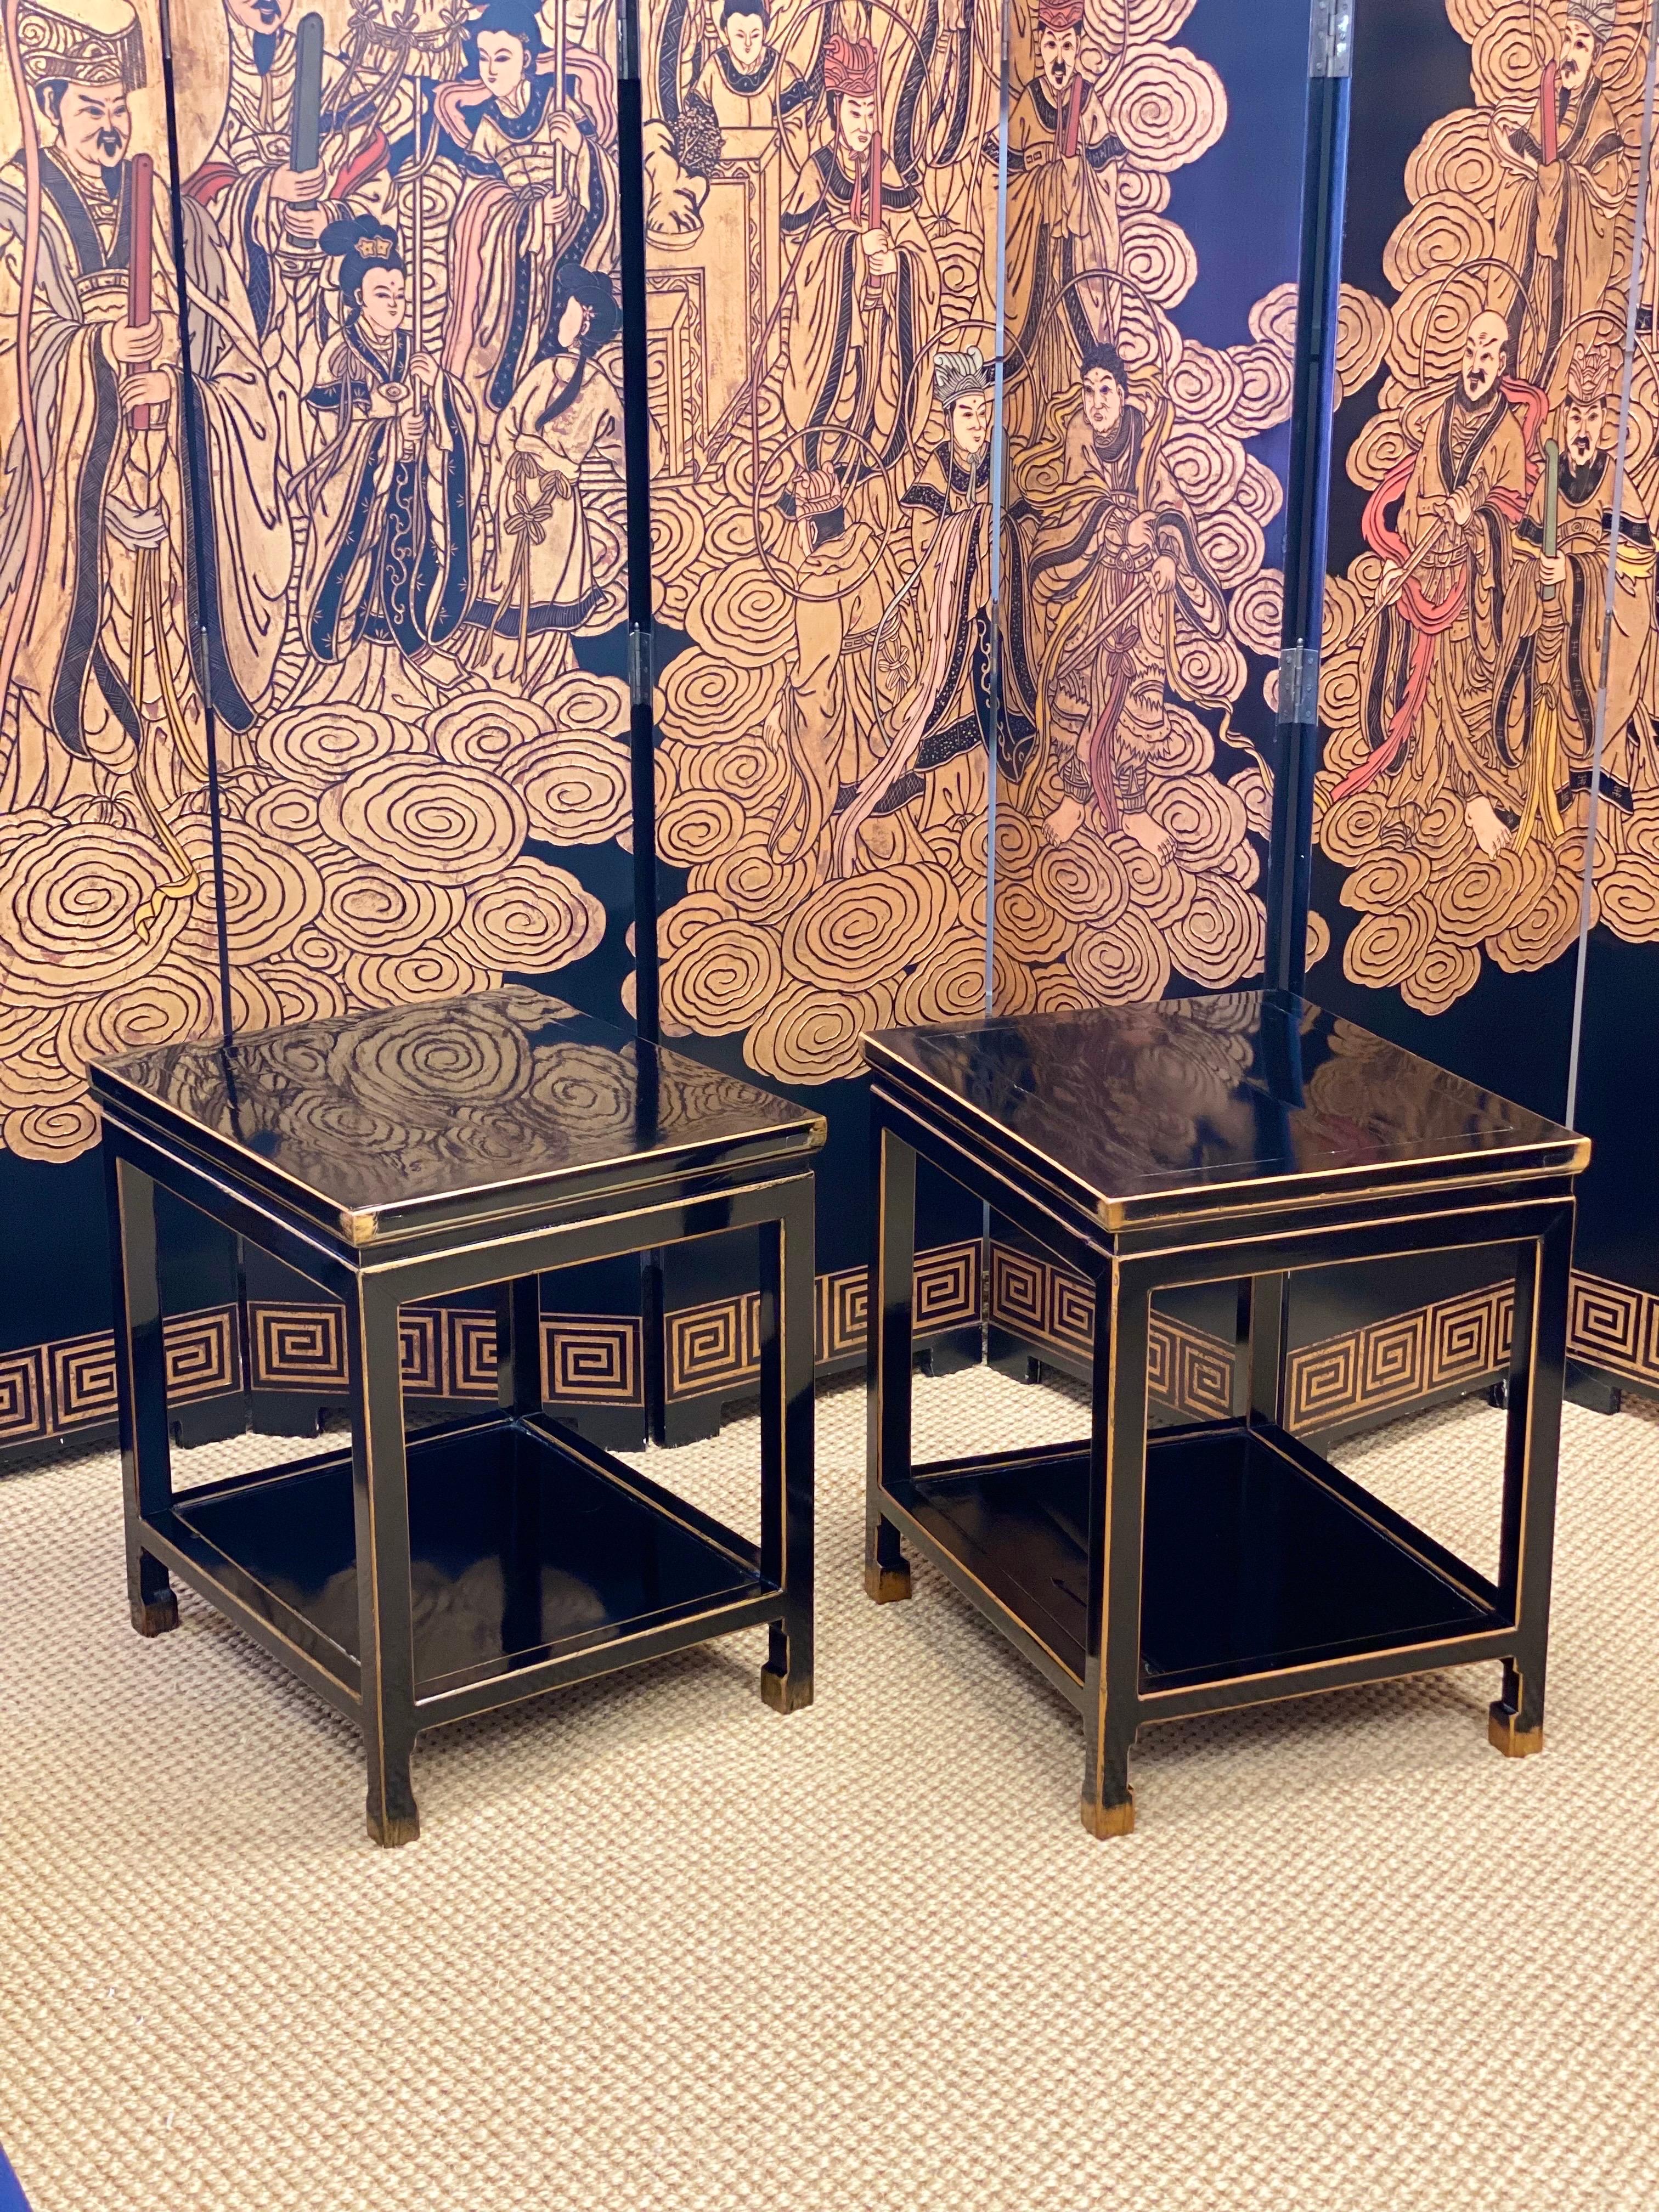 We are very pleased to offer a Chinese Qing Dynasty period side table circa the late 19th century. This solidly crafted pair features a rectangular top embellished with a waisted apron and a lower shelf. Boasting gold accents and a nicely weathered